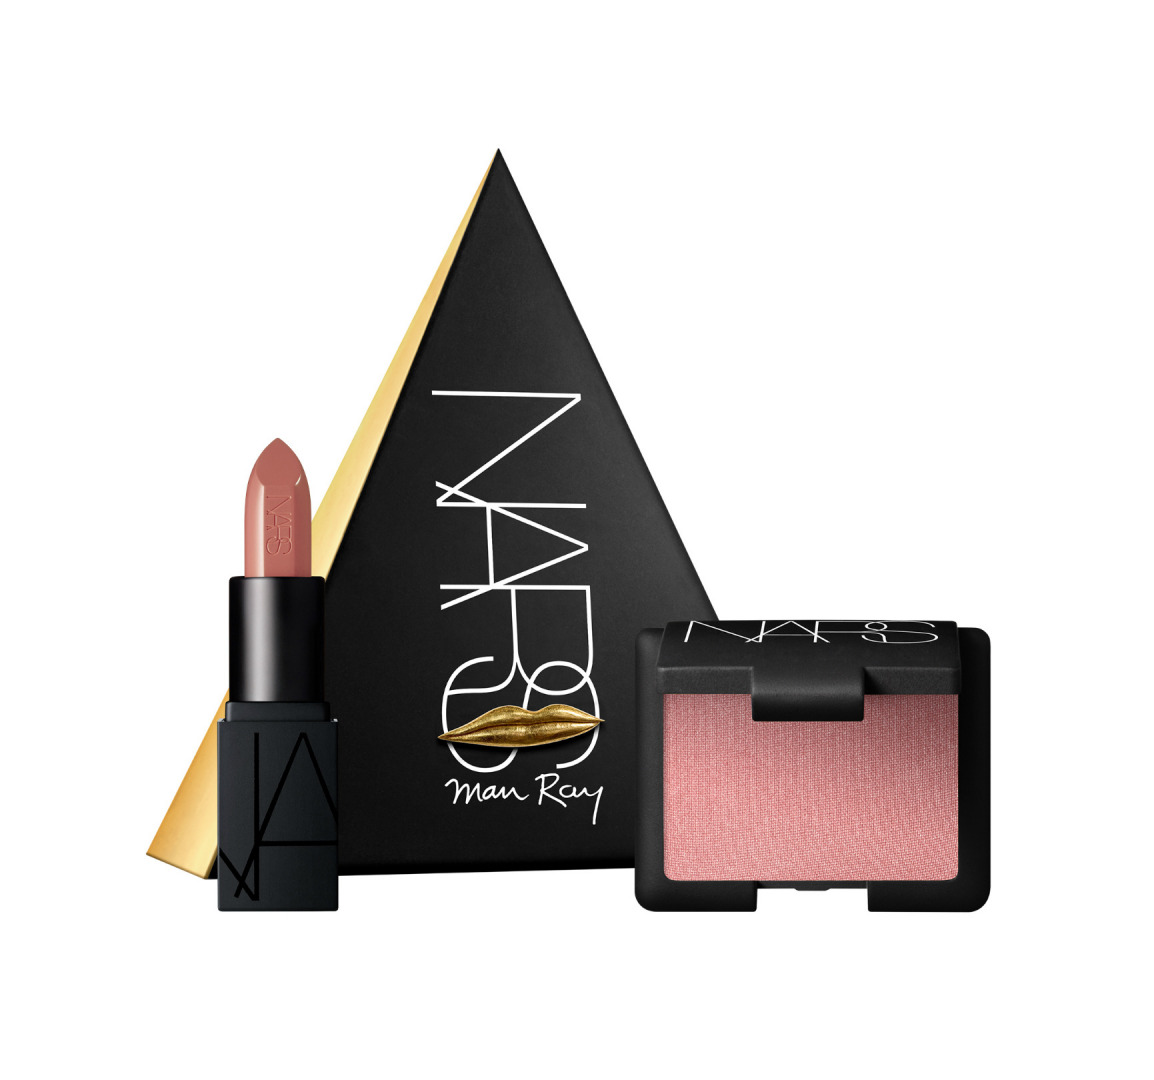 Nars Man Ray for Nars Holiday Collection, Love Triangle